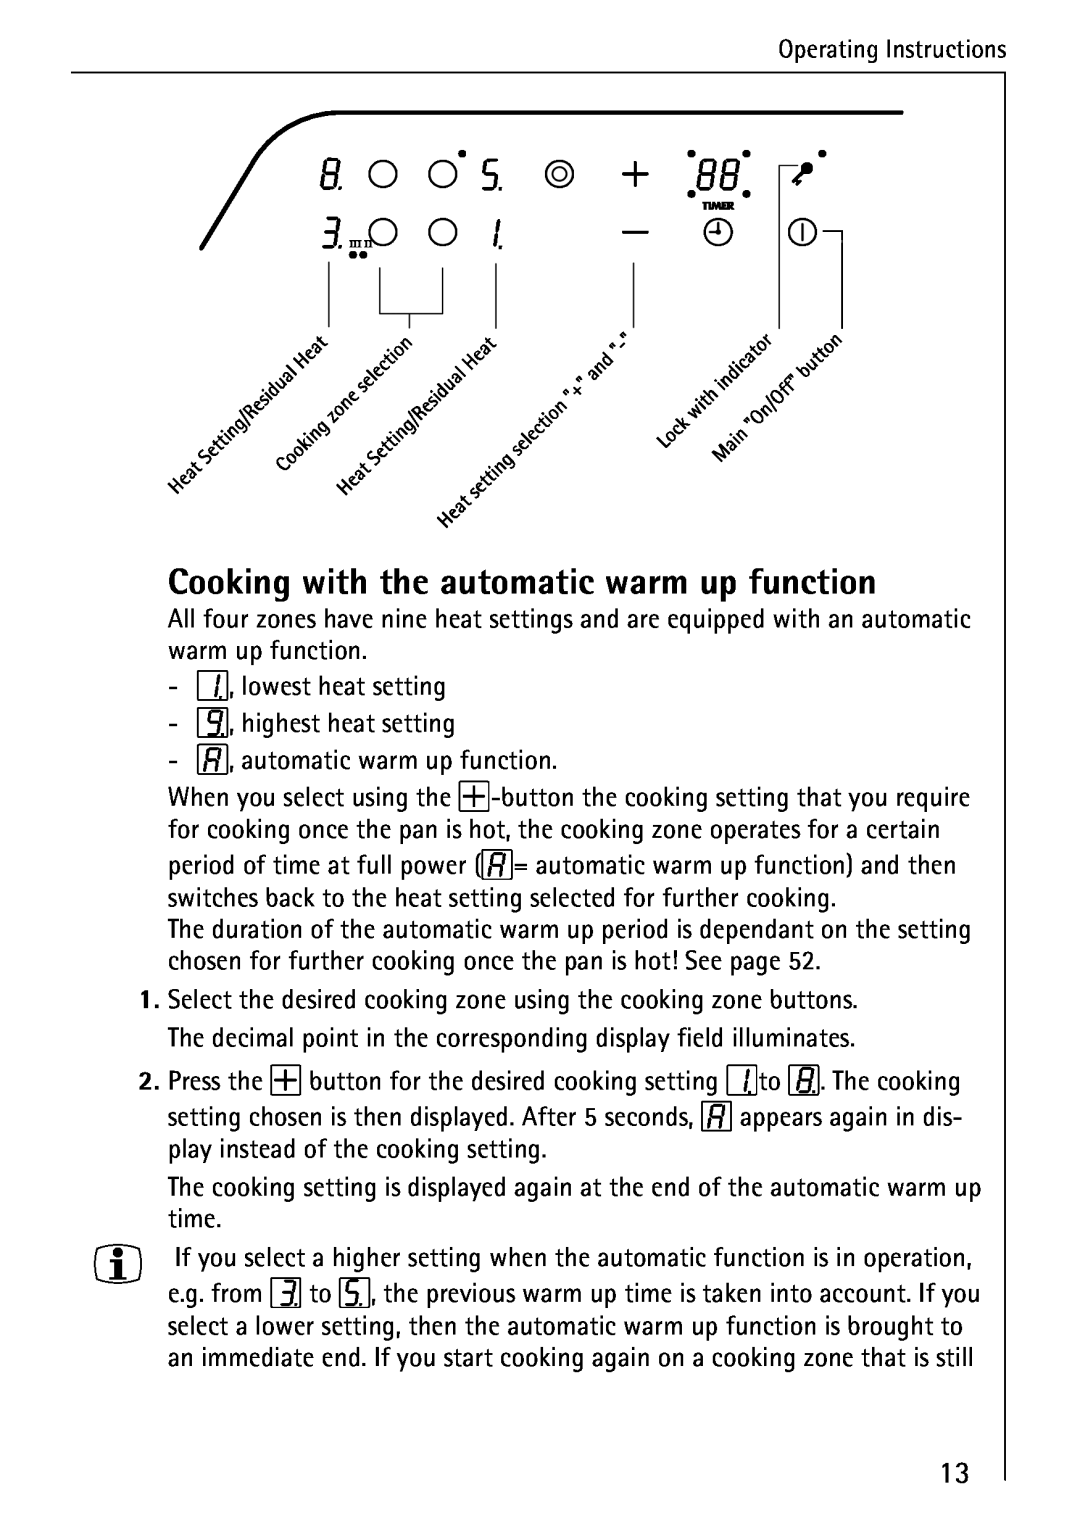 AEG 95300KA-MN operating instructions Cooking with the automatic warm up function 